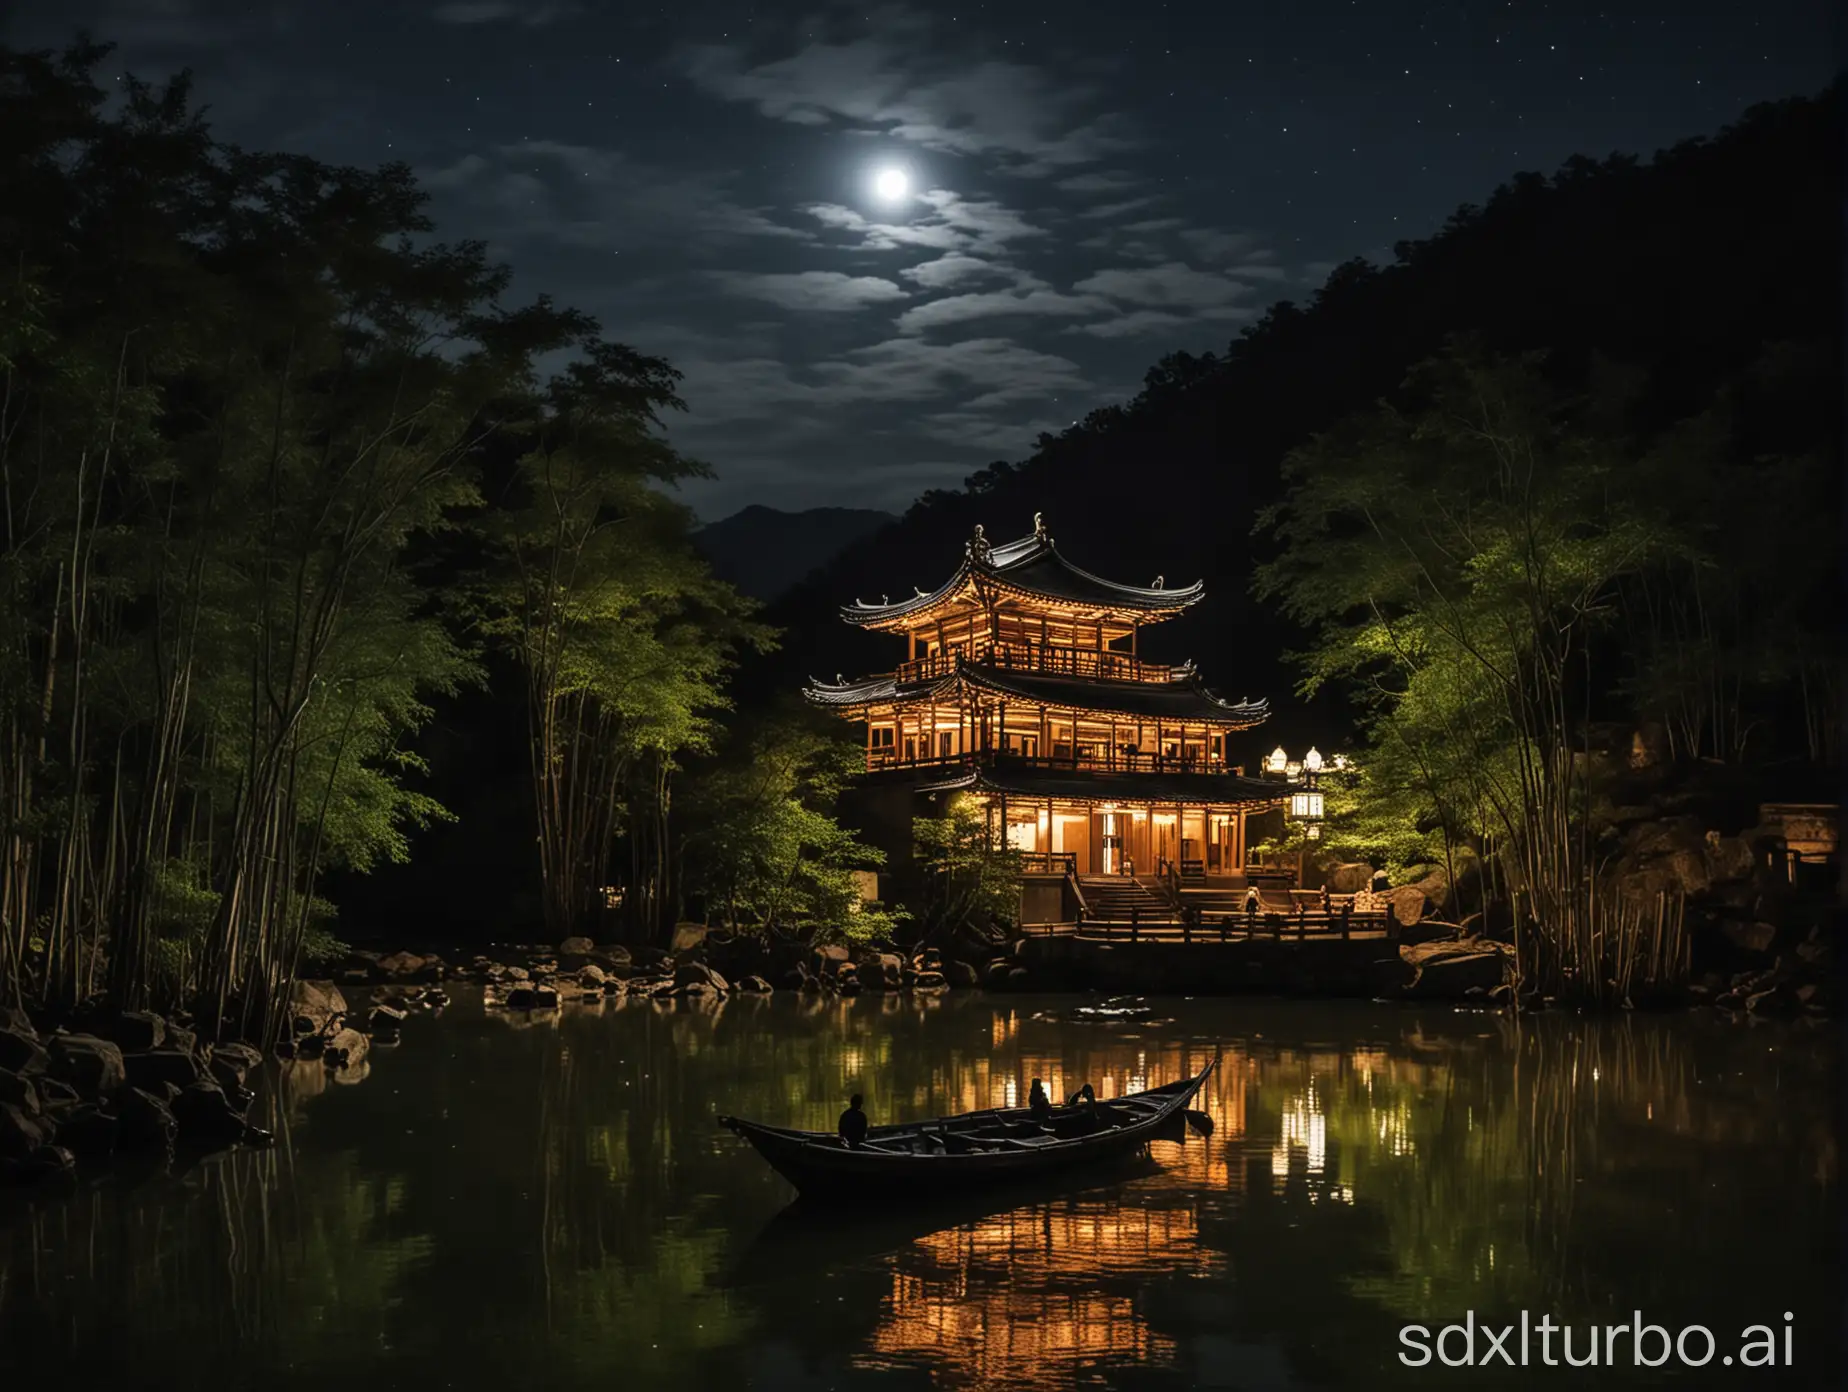 In the quietness of the night, Cold Mountain Temple is located outside of Gusu City. The temple's architectural style is archaic, with eaves that curve and overlap, making it appear particularly tranquil under the moonlight. The temple is surrounded by a dense bamboo forest, and when the wind blows, the bamboo leaves rustle softly. In the distance, a winding river can barely be seen, with twinkling lights on the surface of the water. A small boat is docked beside the river, and the tourists on board are looking up at Cold Mountain Temple. A lantern is hung on the small boat, casting a dim light that illuminates both inside and outside the cabin, giving off a warm feeling. The faces of the tourists on the boat are mysterious yet peaceful under the interweaving light of the lamp and the moon.